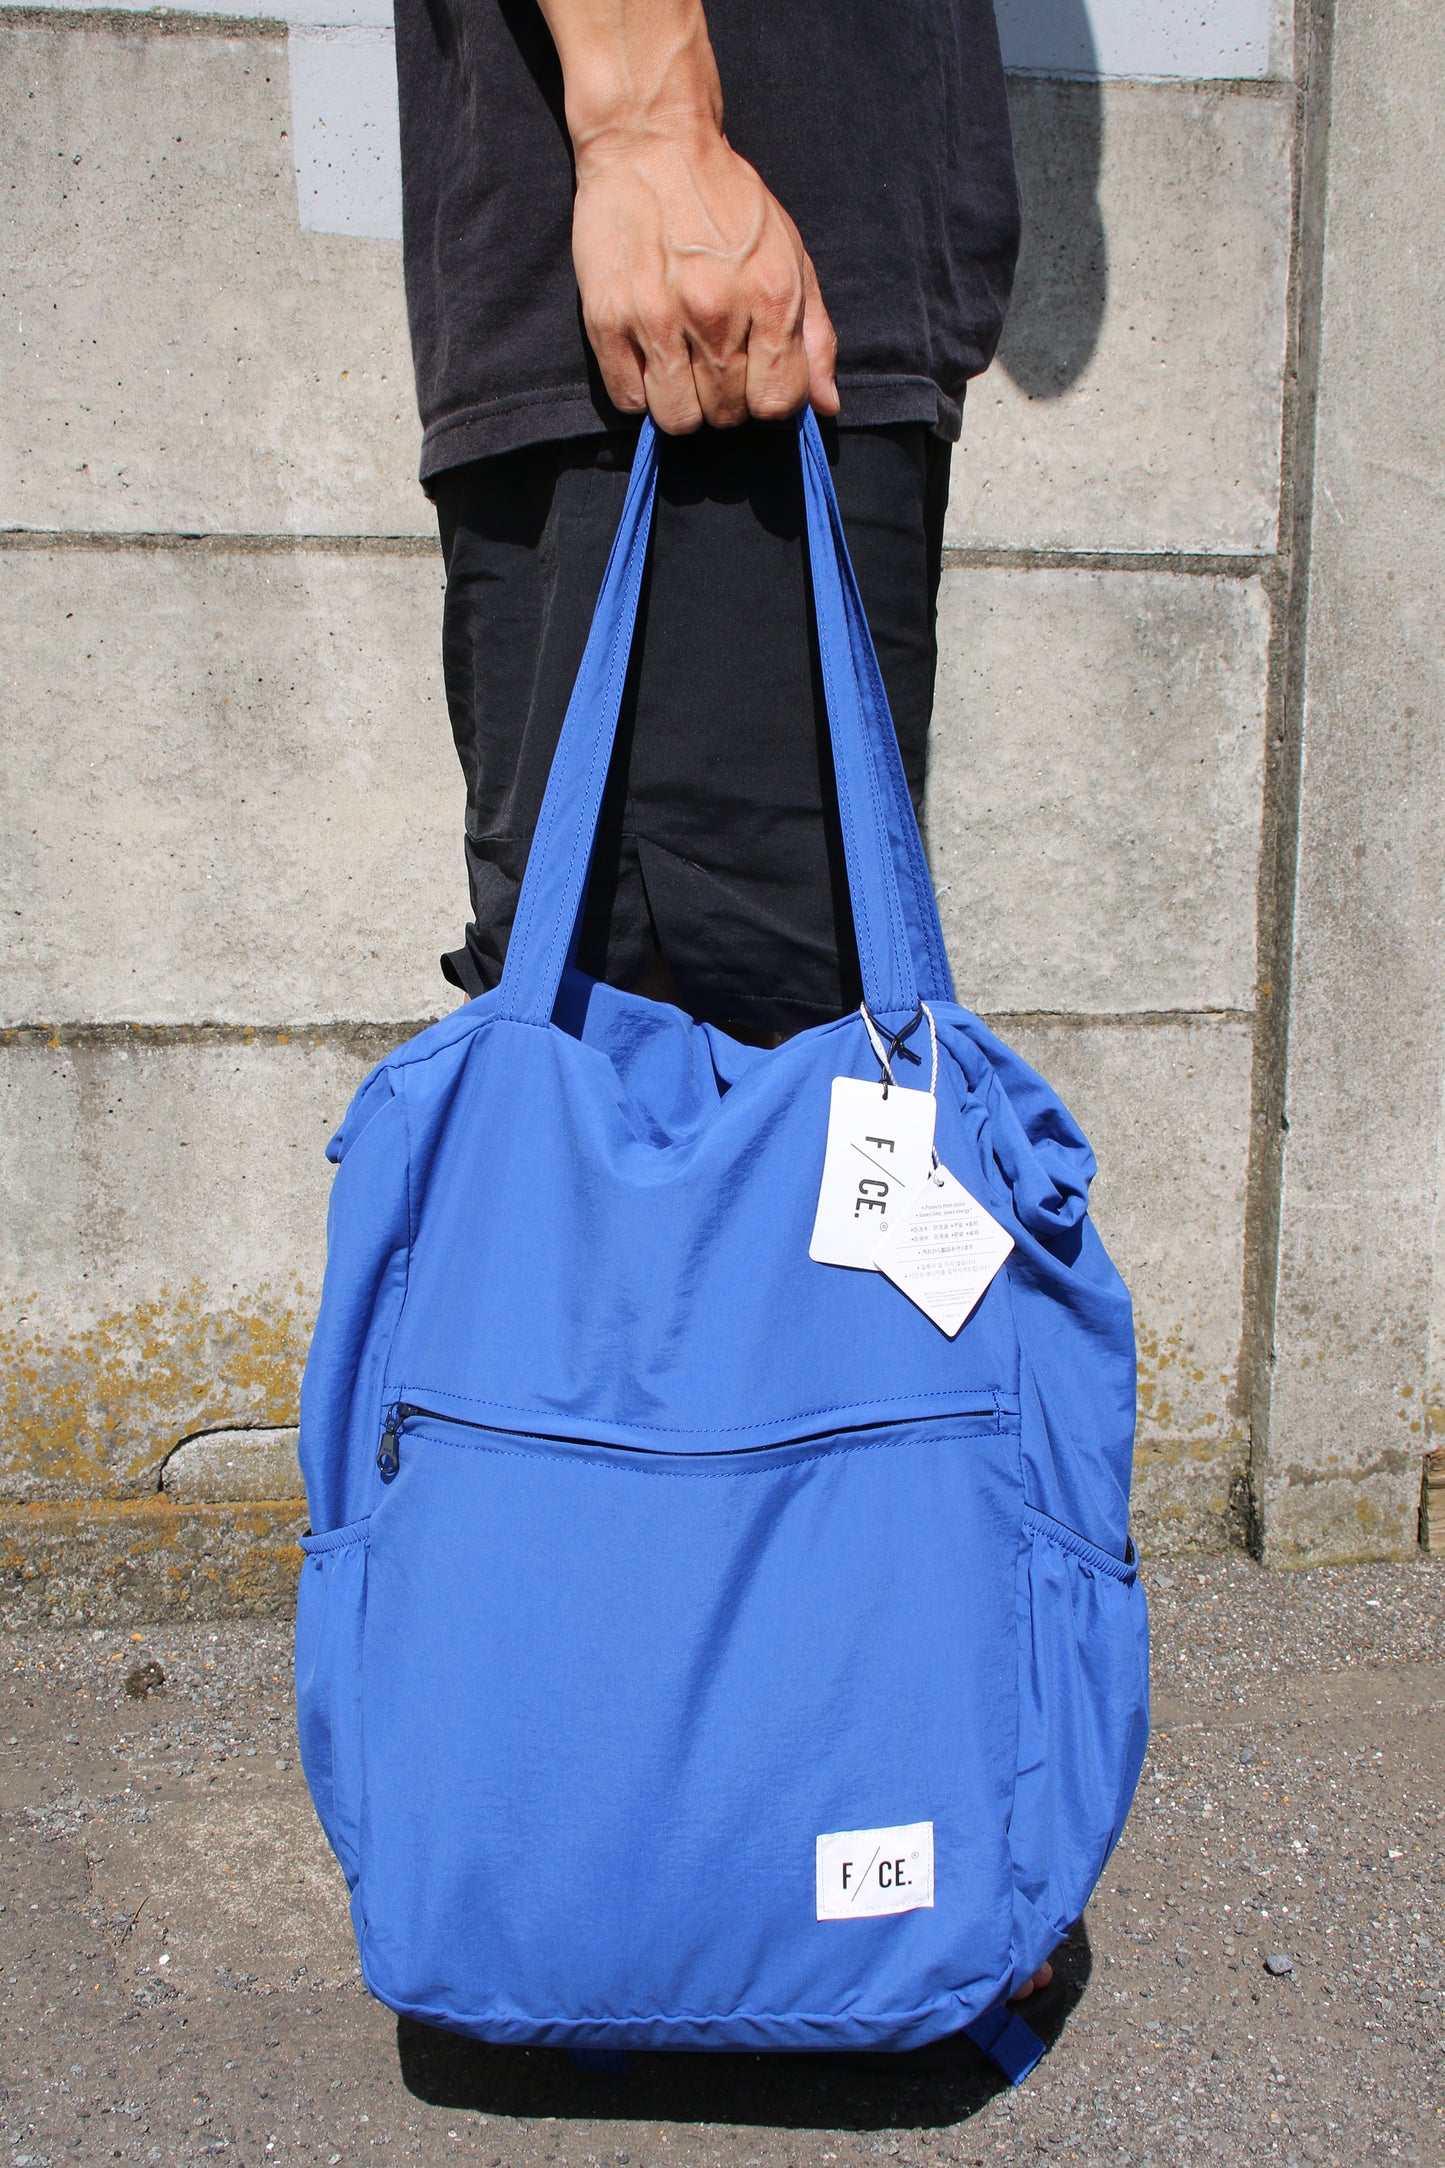 USED PACKABLE TOTE BLUE